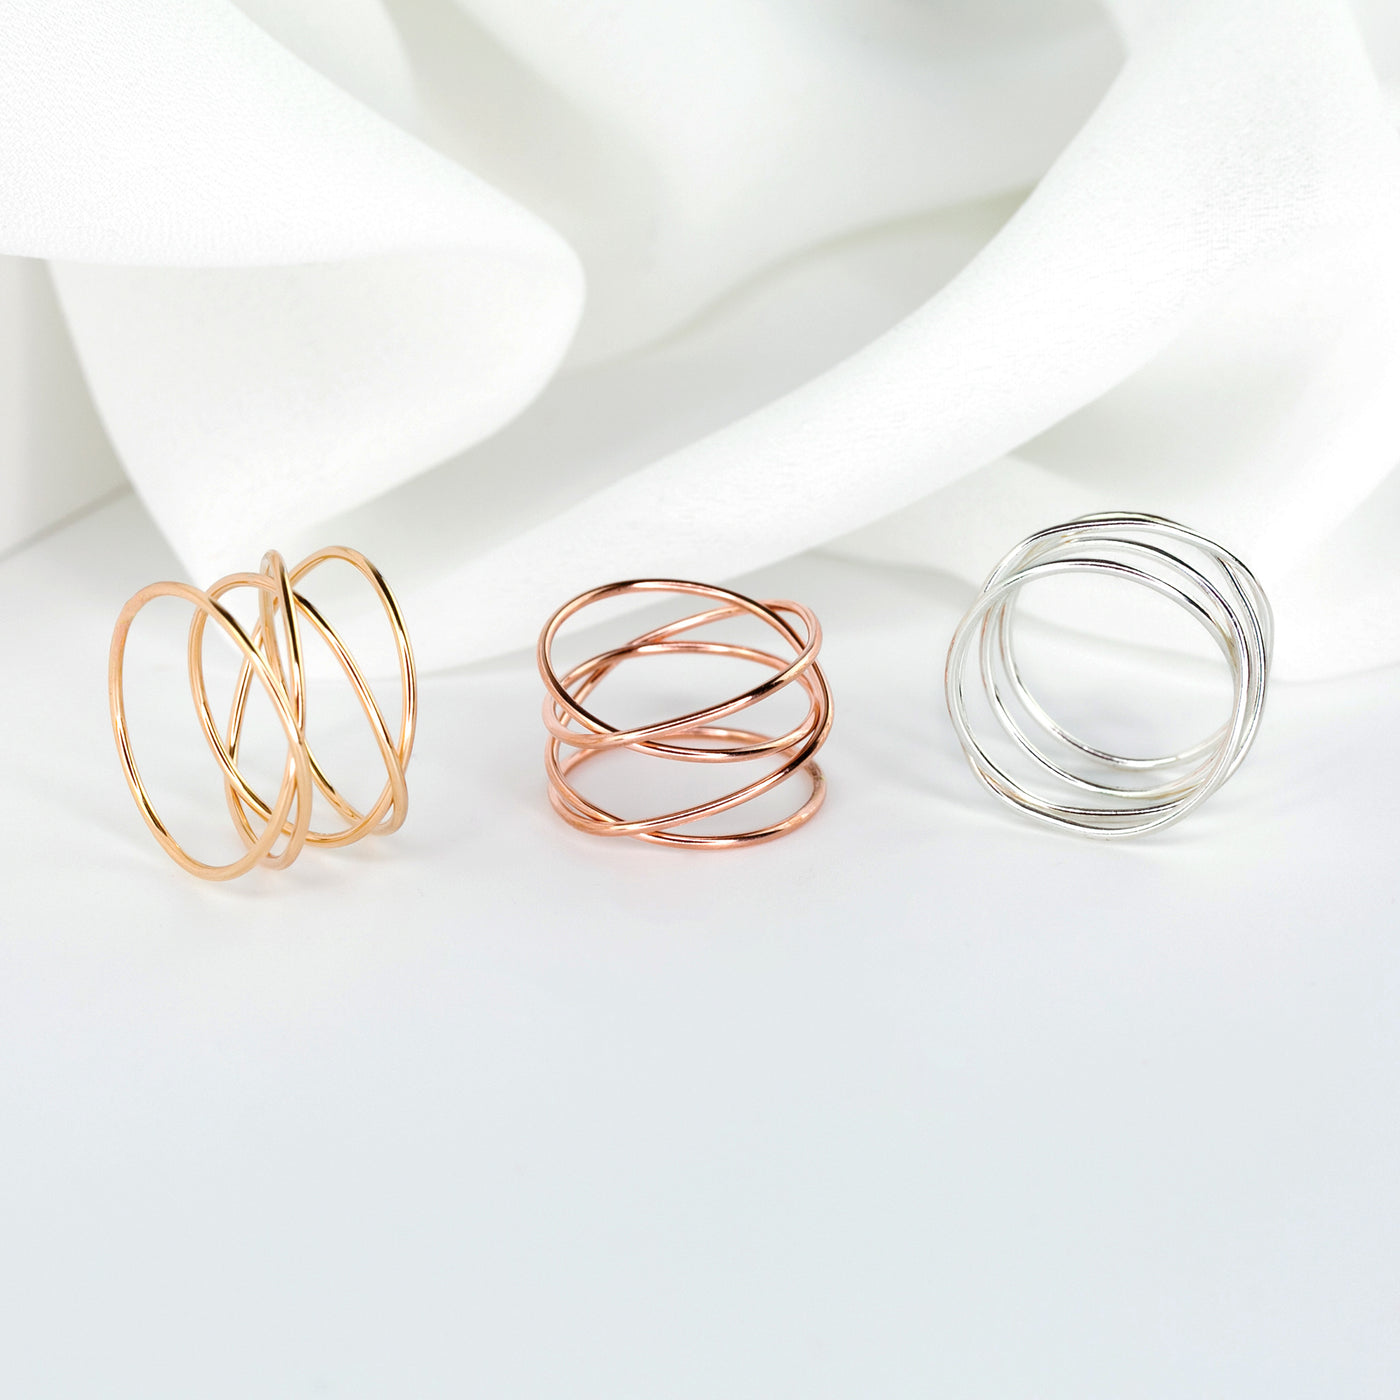 Woven 4-Band Ring - 14k Rose Gold Fill